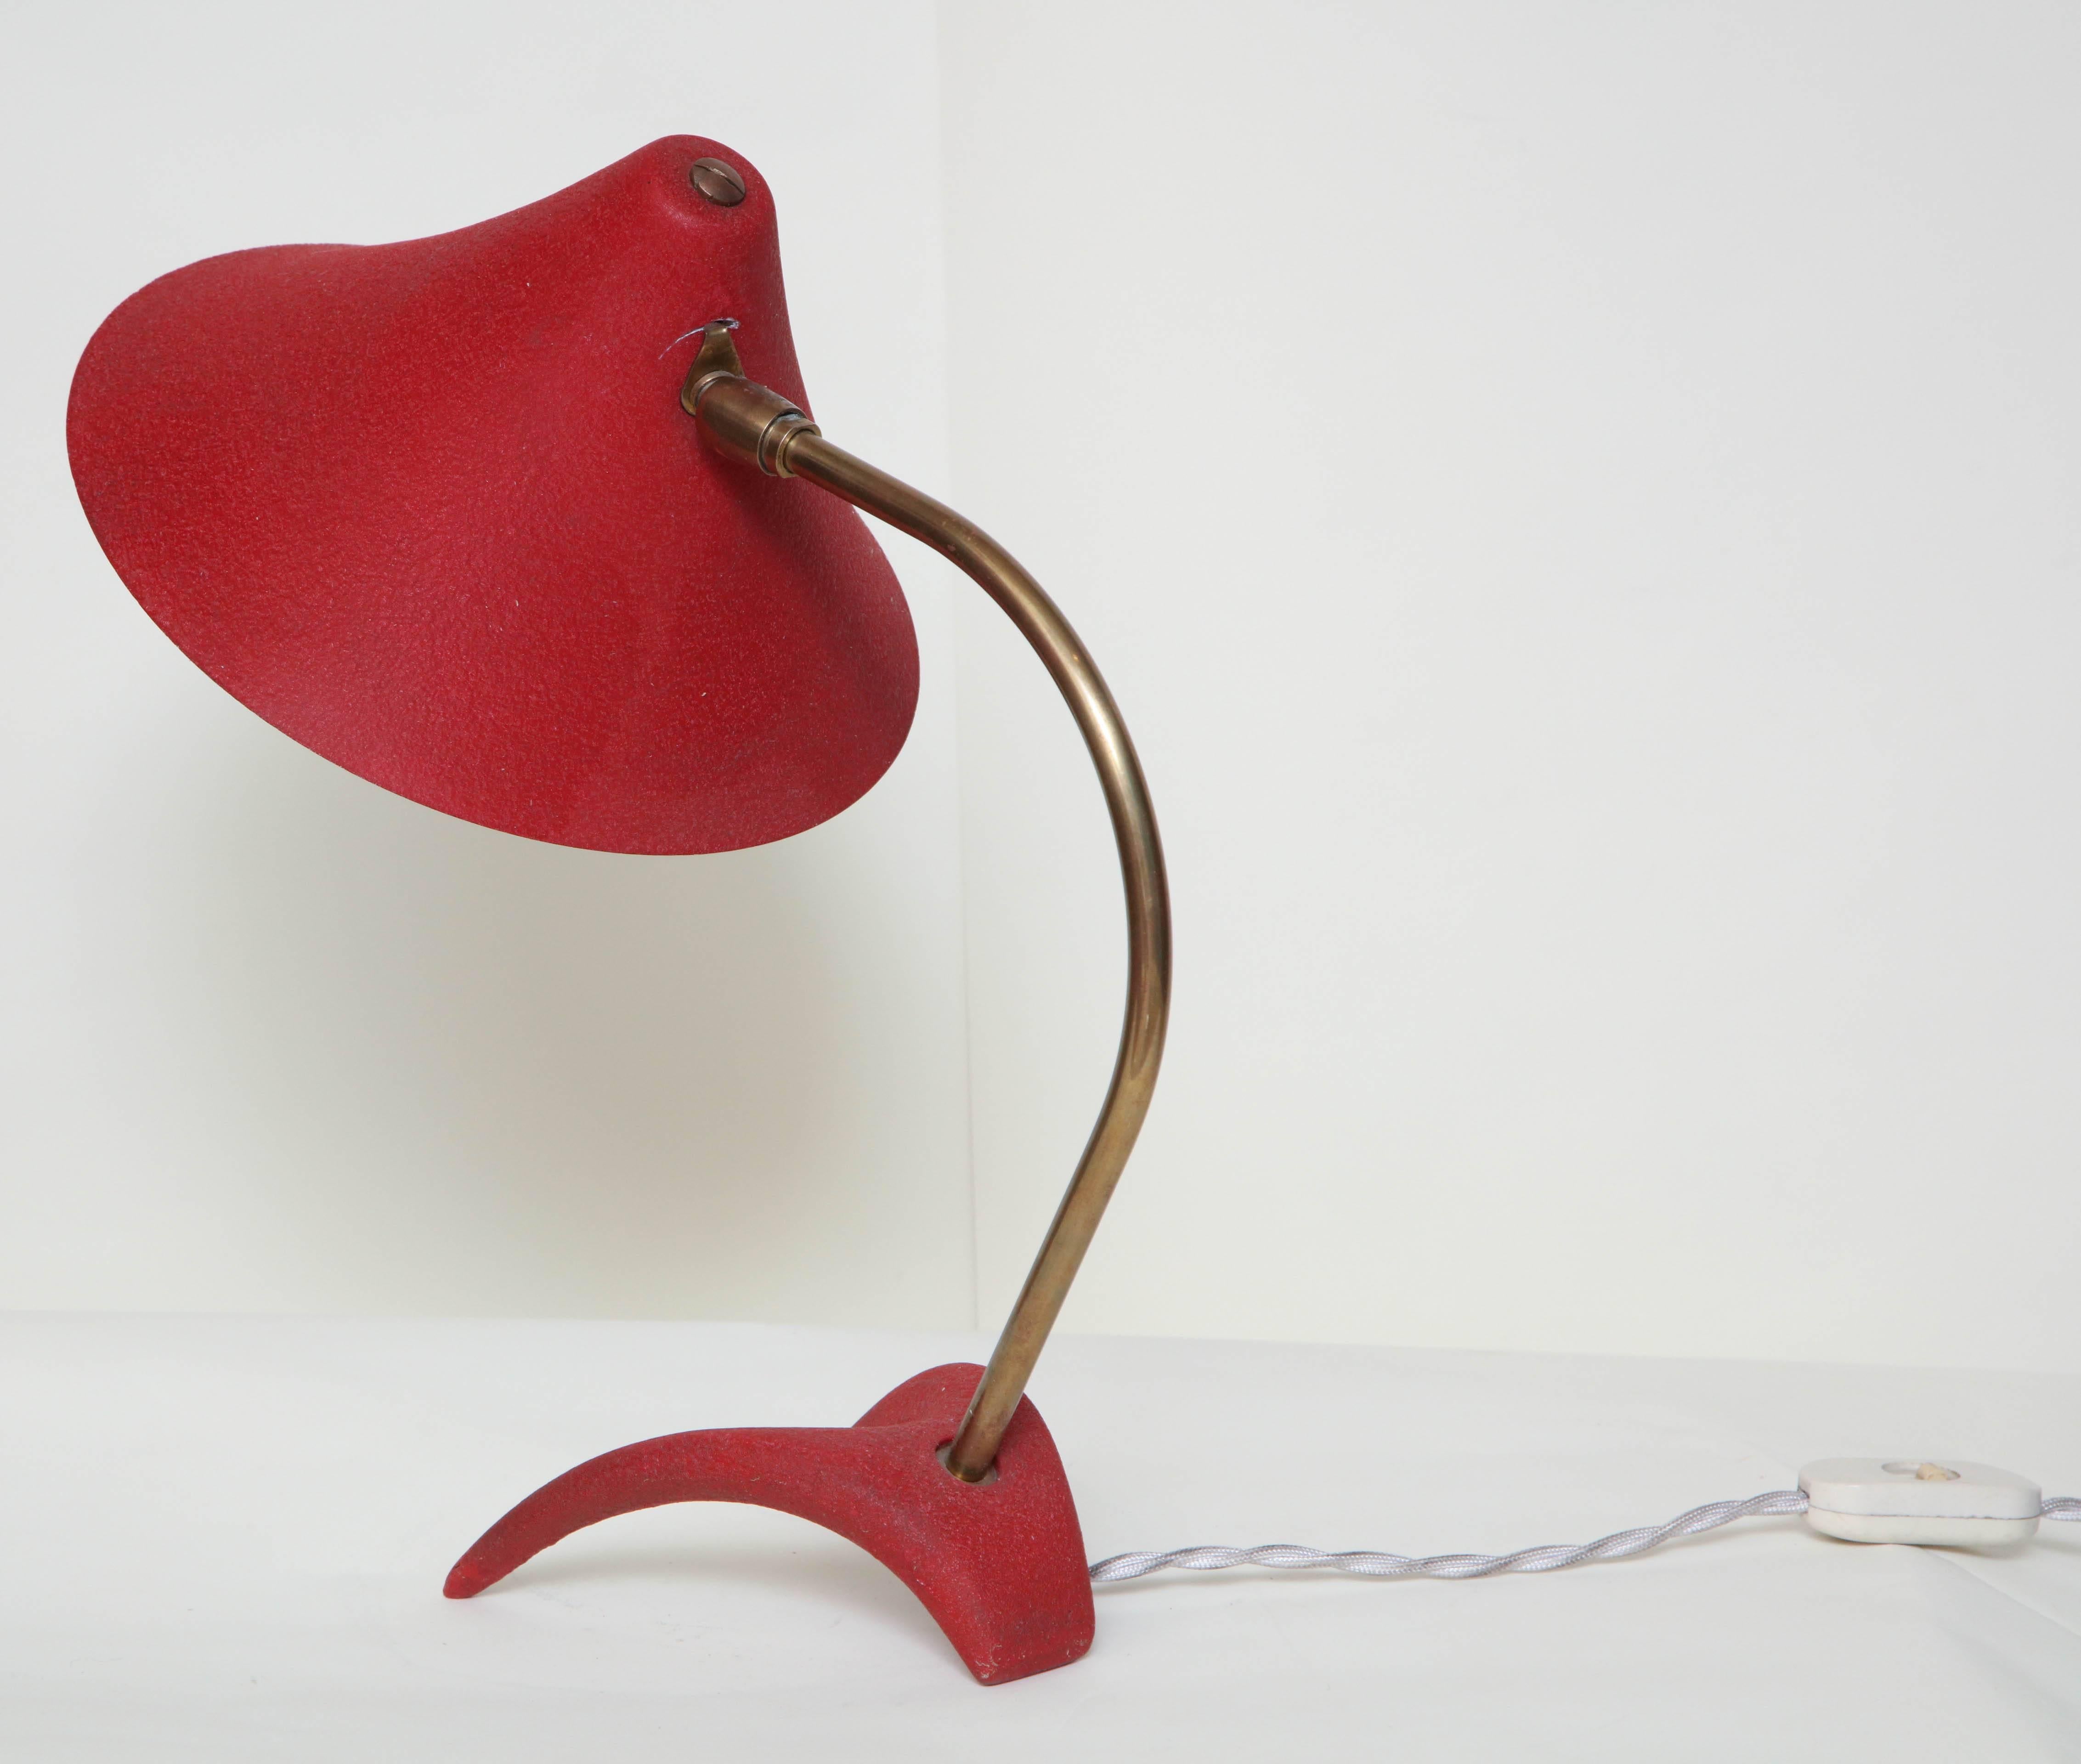 Mid-20th Century Pair of Articulated Table Lamps 1950s Mid-Century Modern Austrian